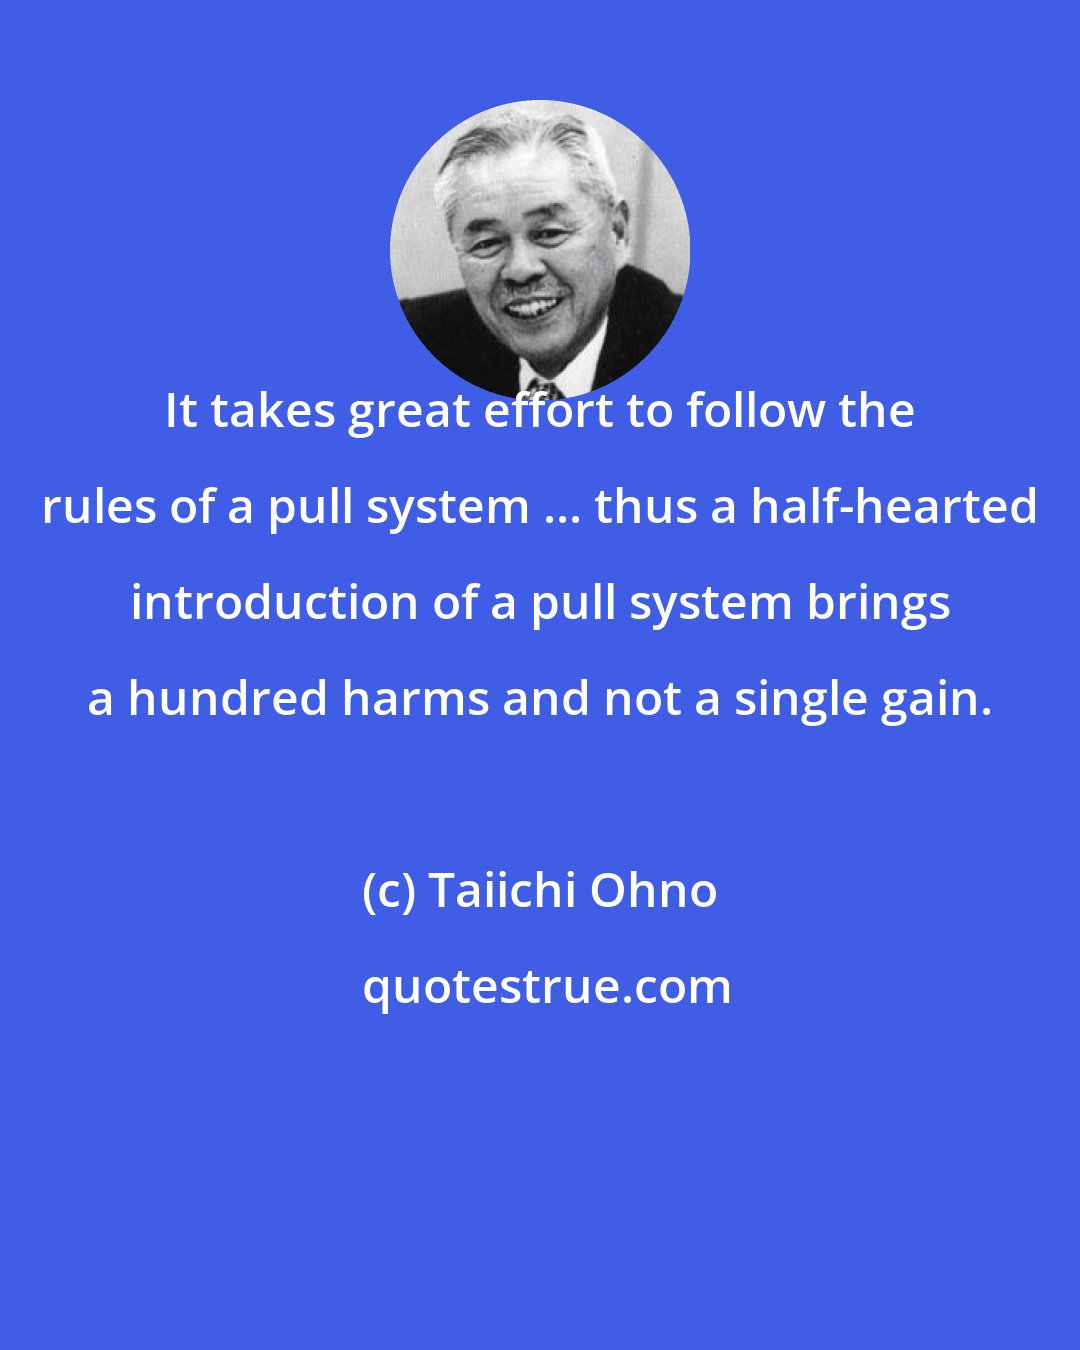 Taiichi Ohno: It takes great effort to follow the rules of a pull system ... thus a half-hearted introduction of a pull system brings a hundred harms and not a single gain.